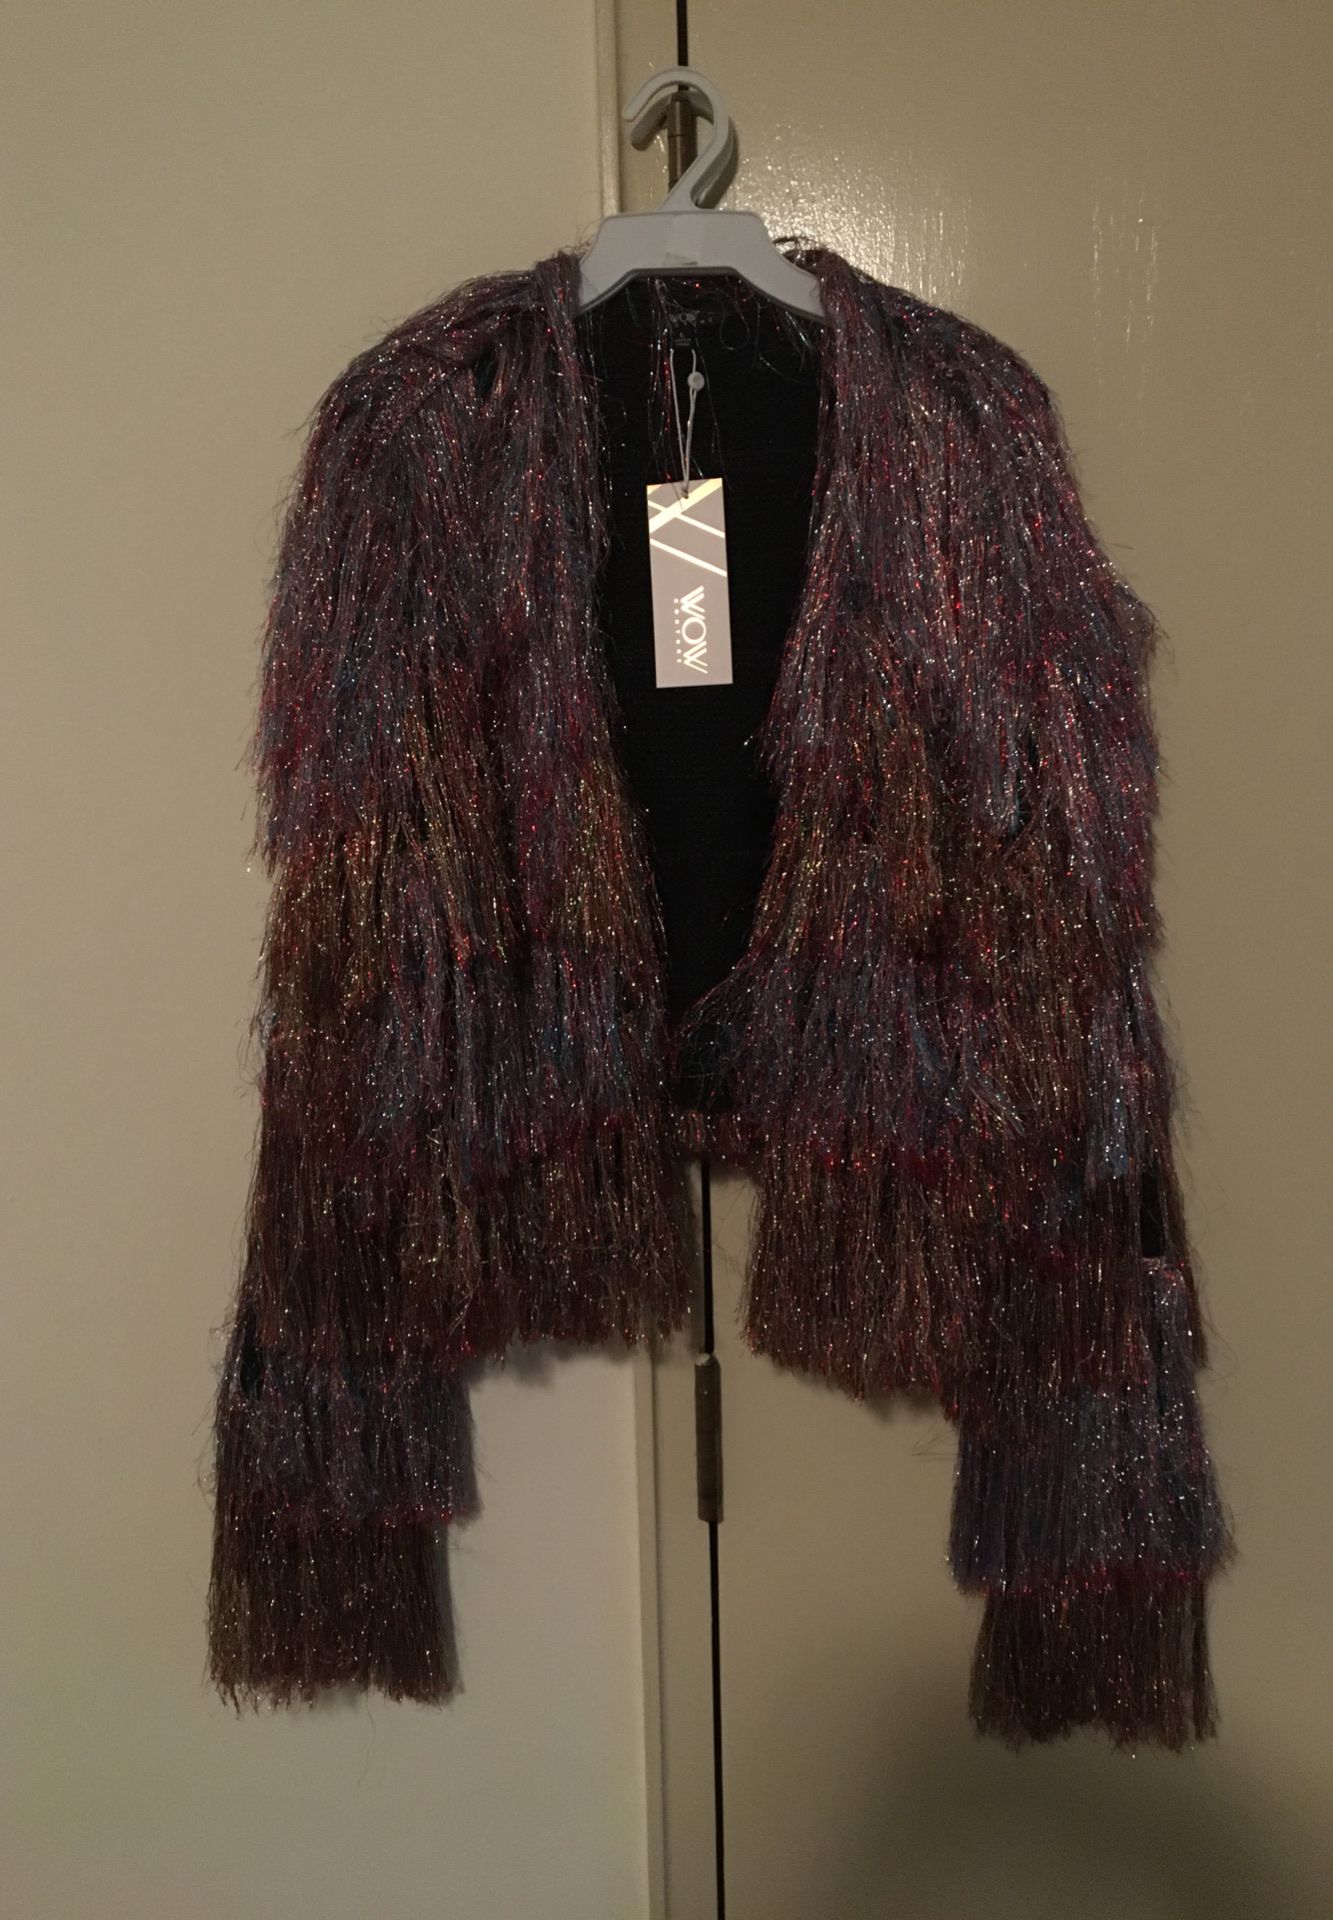 Fringed jacket new with tag